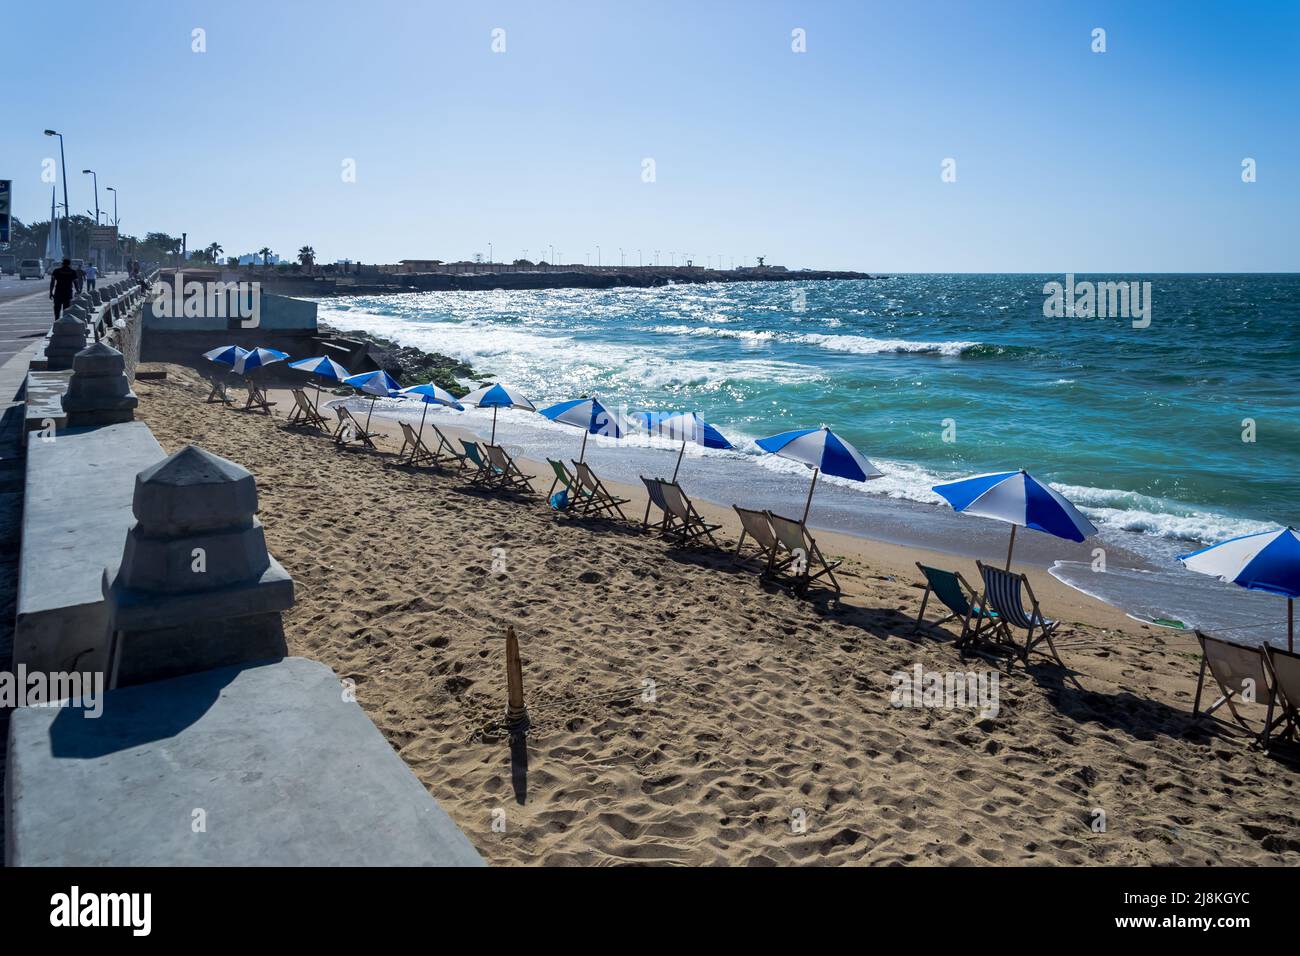 View of El Shatby Beach corniche, located at El Gaish street in the municipality of Alexandria, Egypt Stock Photo